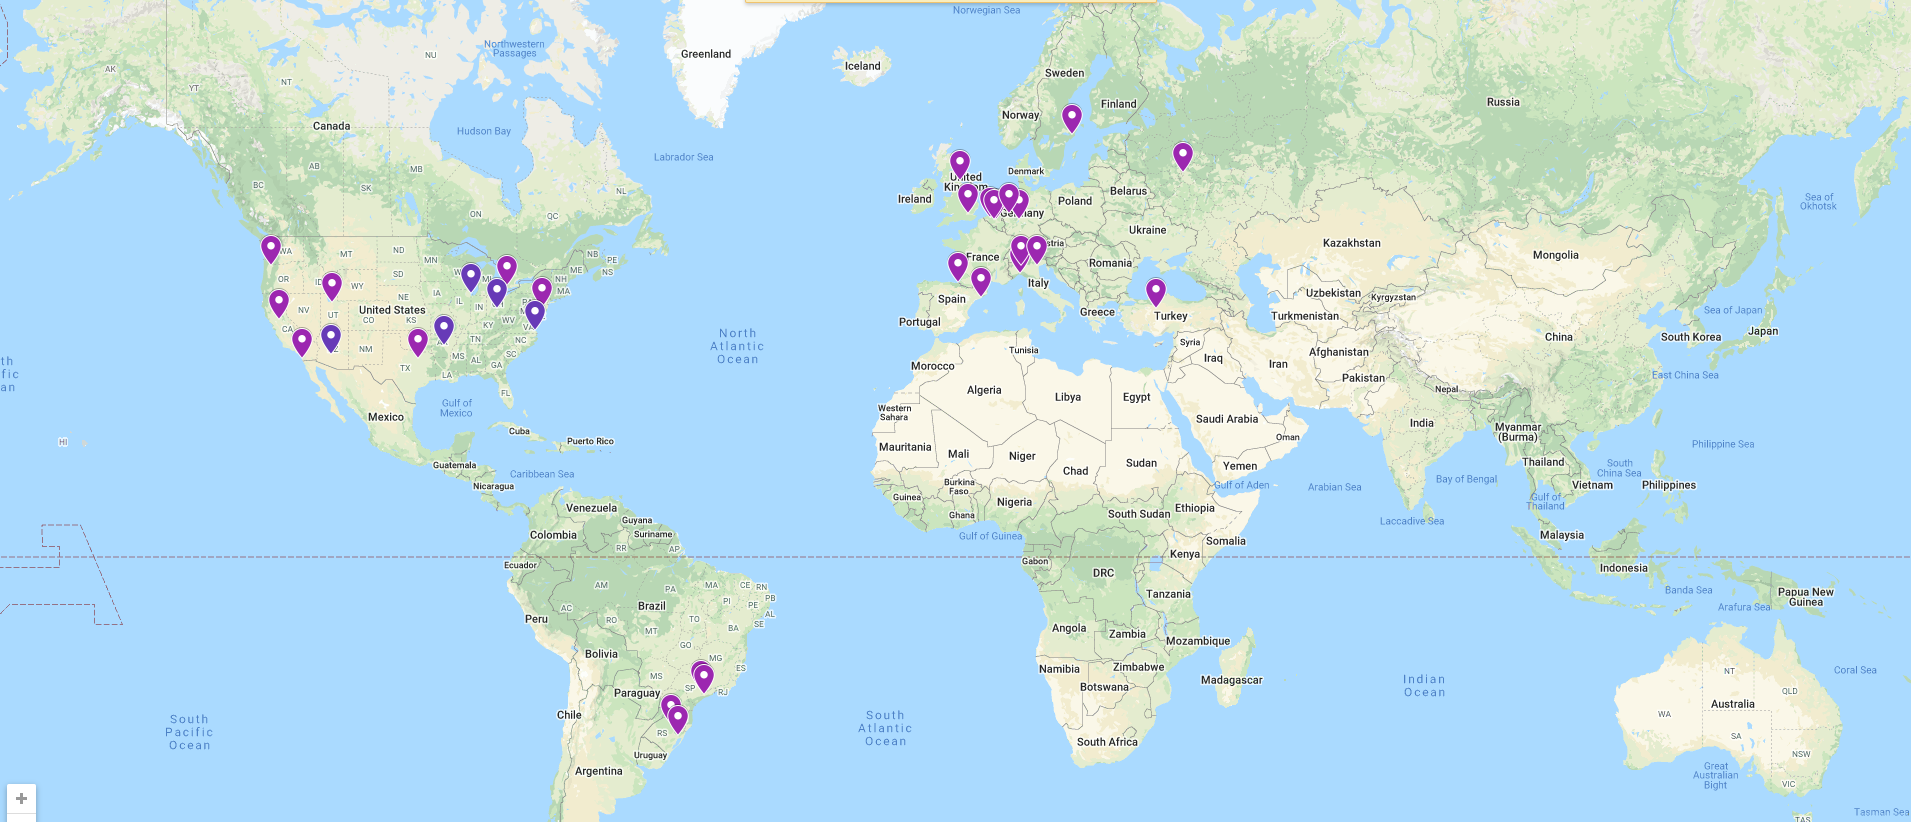 global sites map 